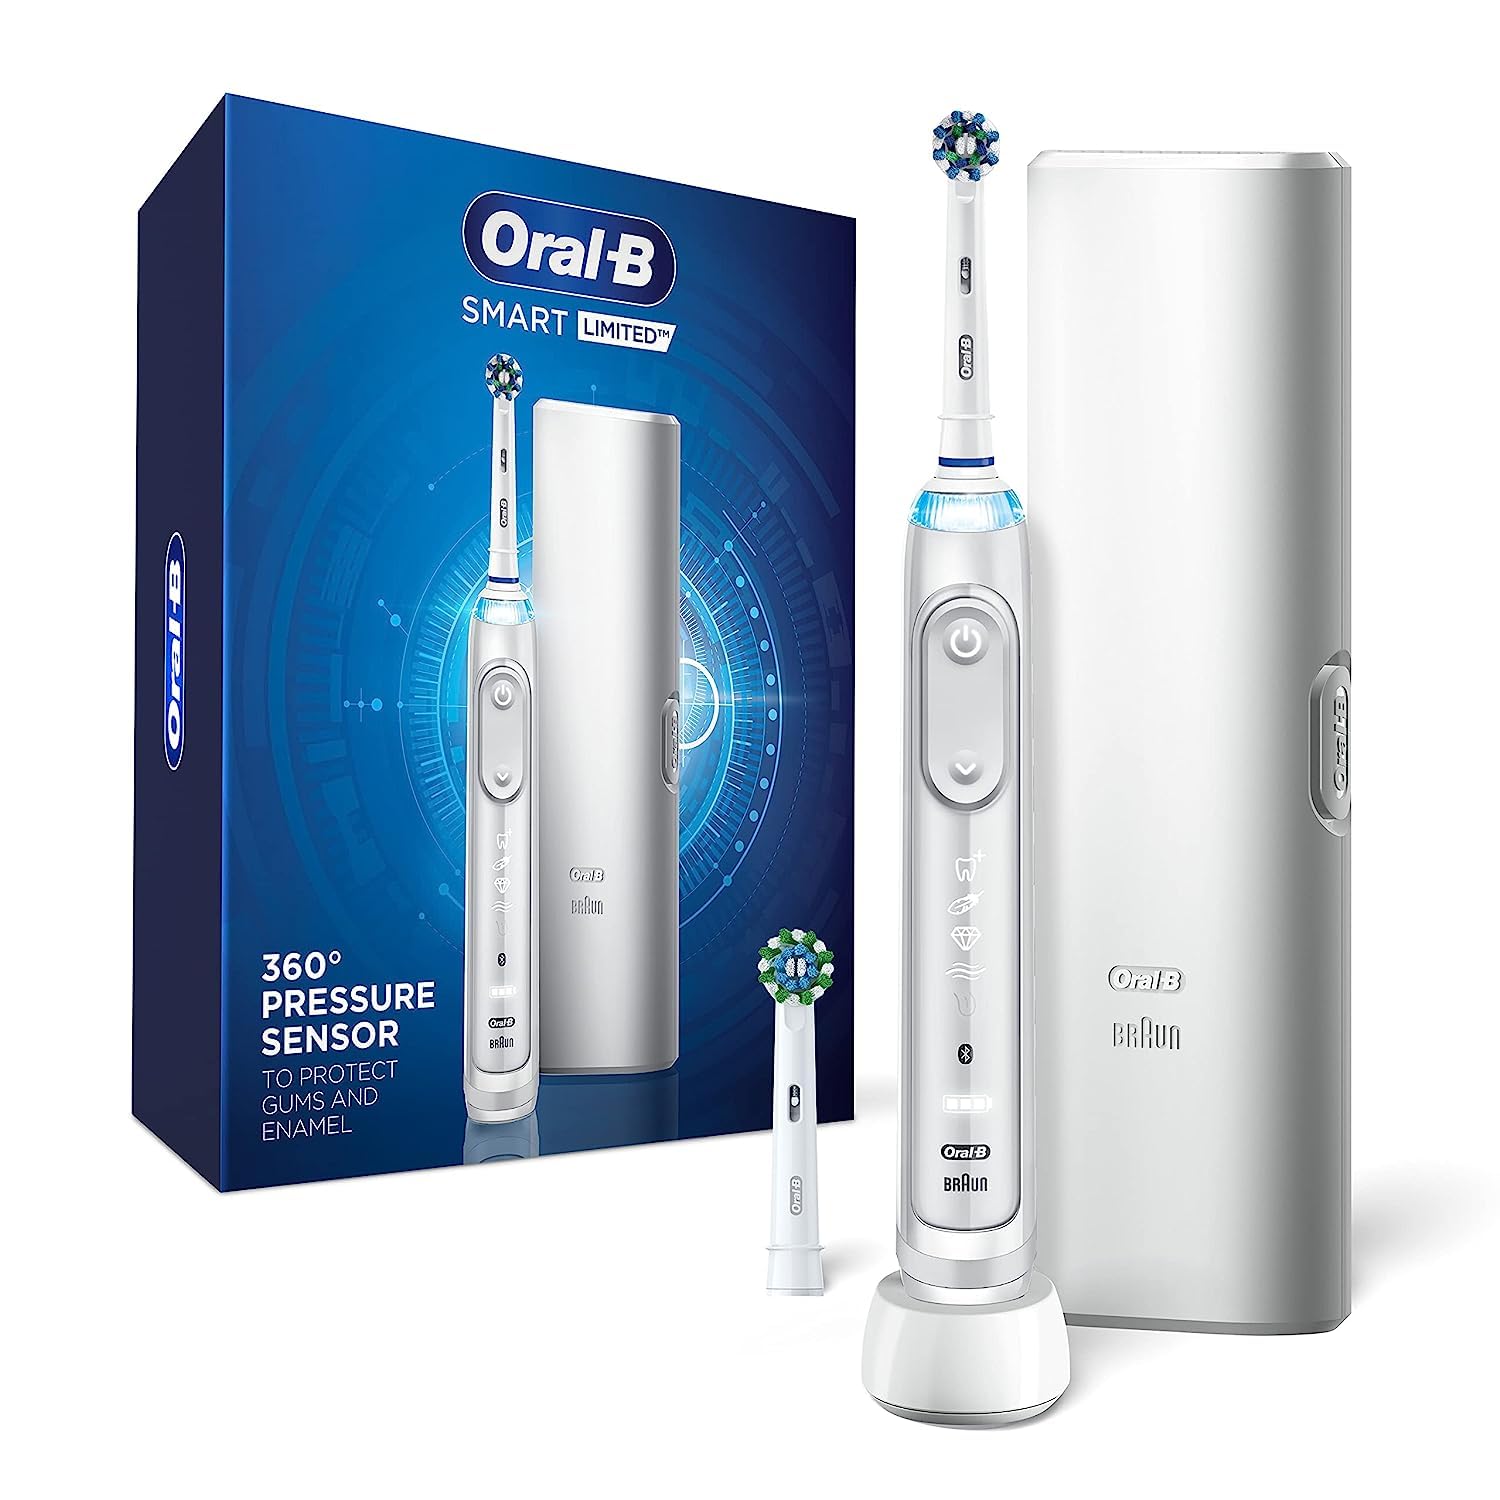 Oral-B Pro Smart Limited Power Rechargeable Electric Toothbrush w/ 2 Brush Heads & Travel Case (Various Colors) $90 + Free Shipping